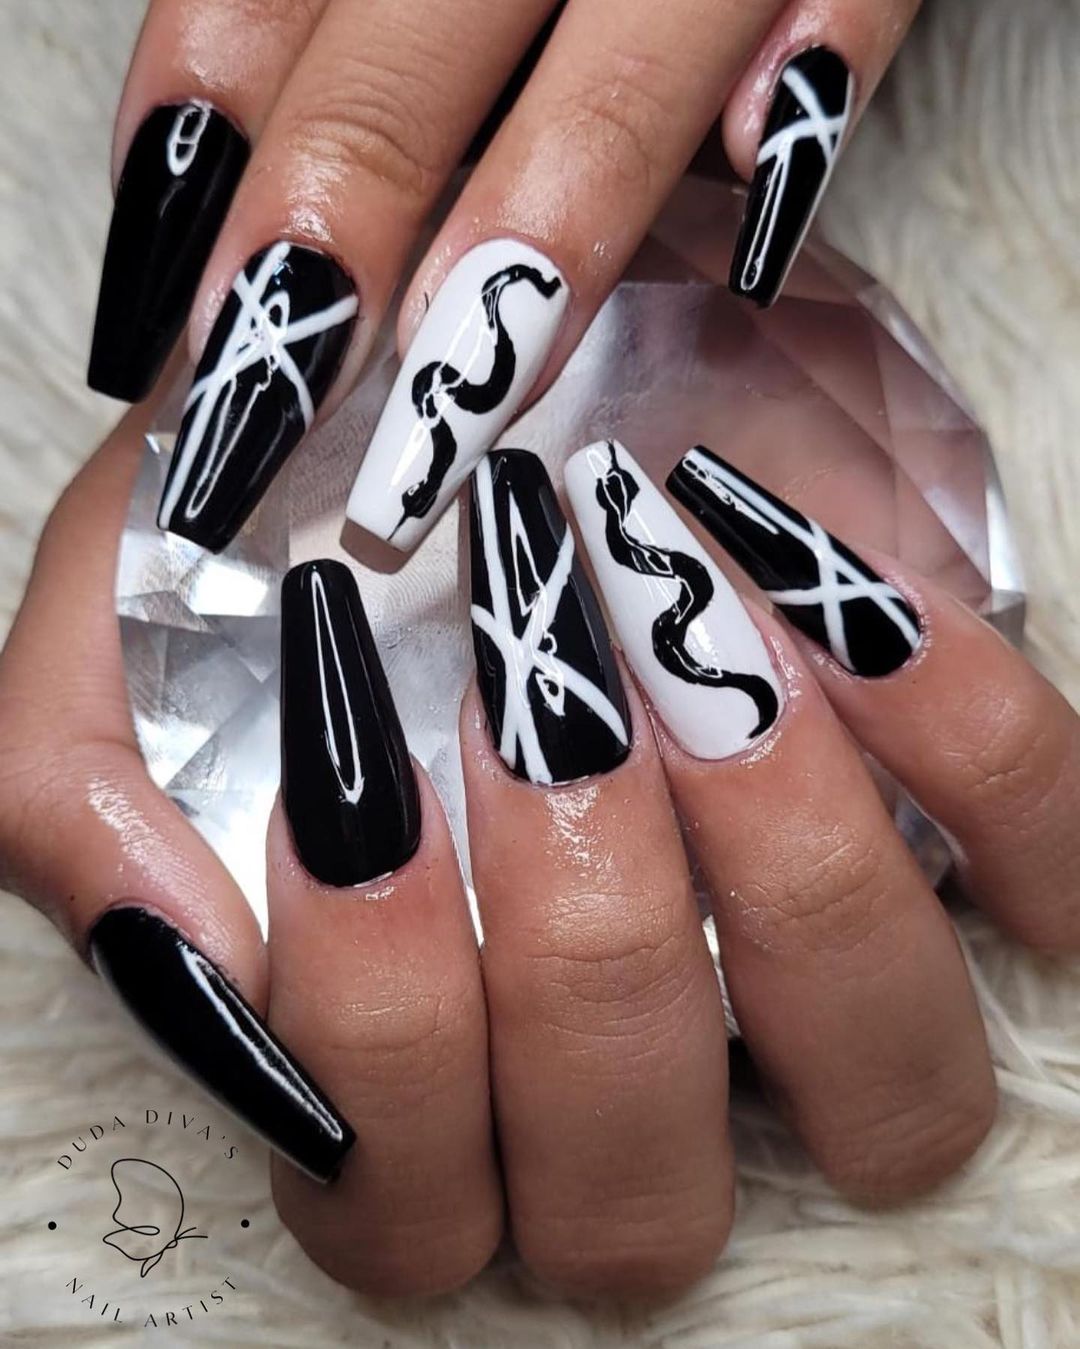 Edgy nails for January